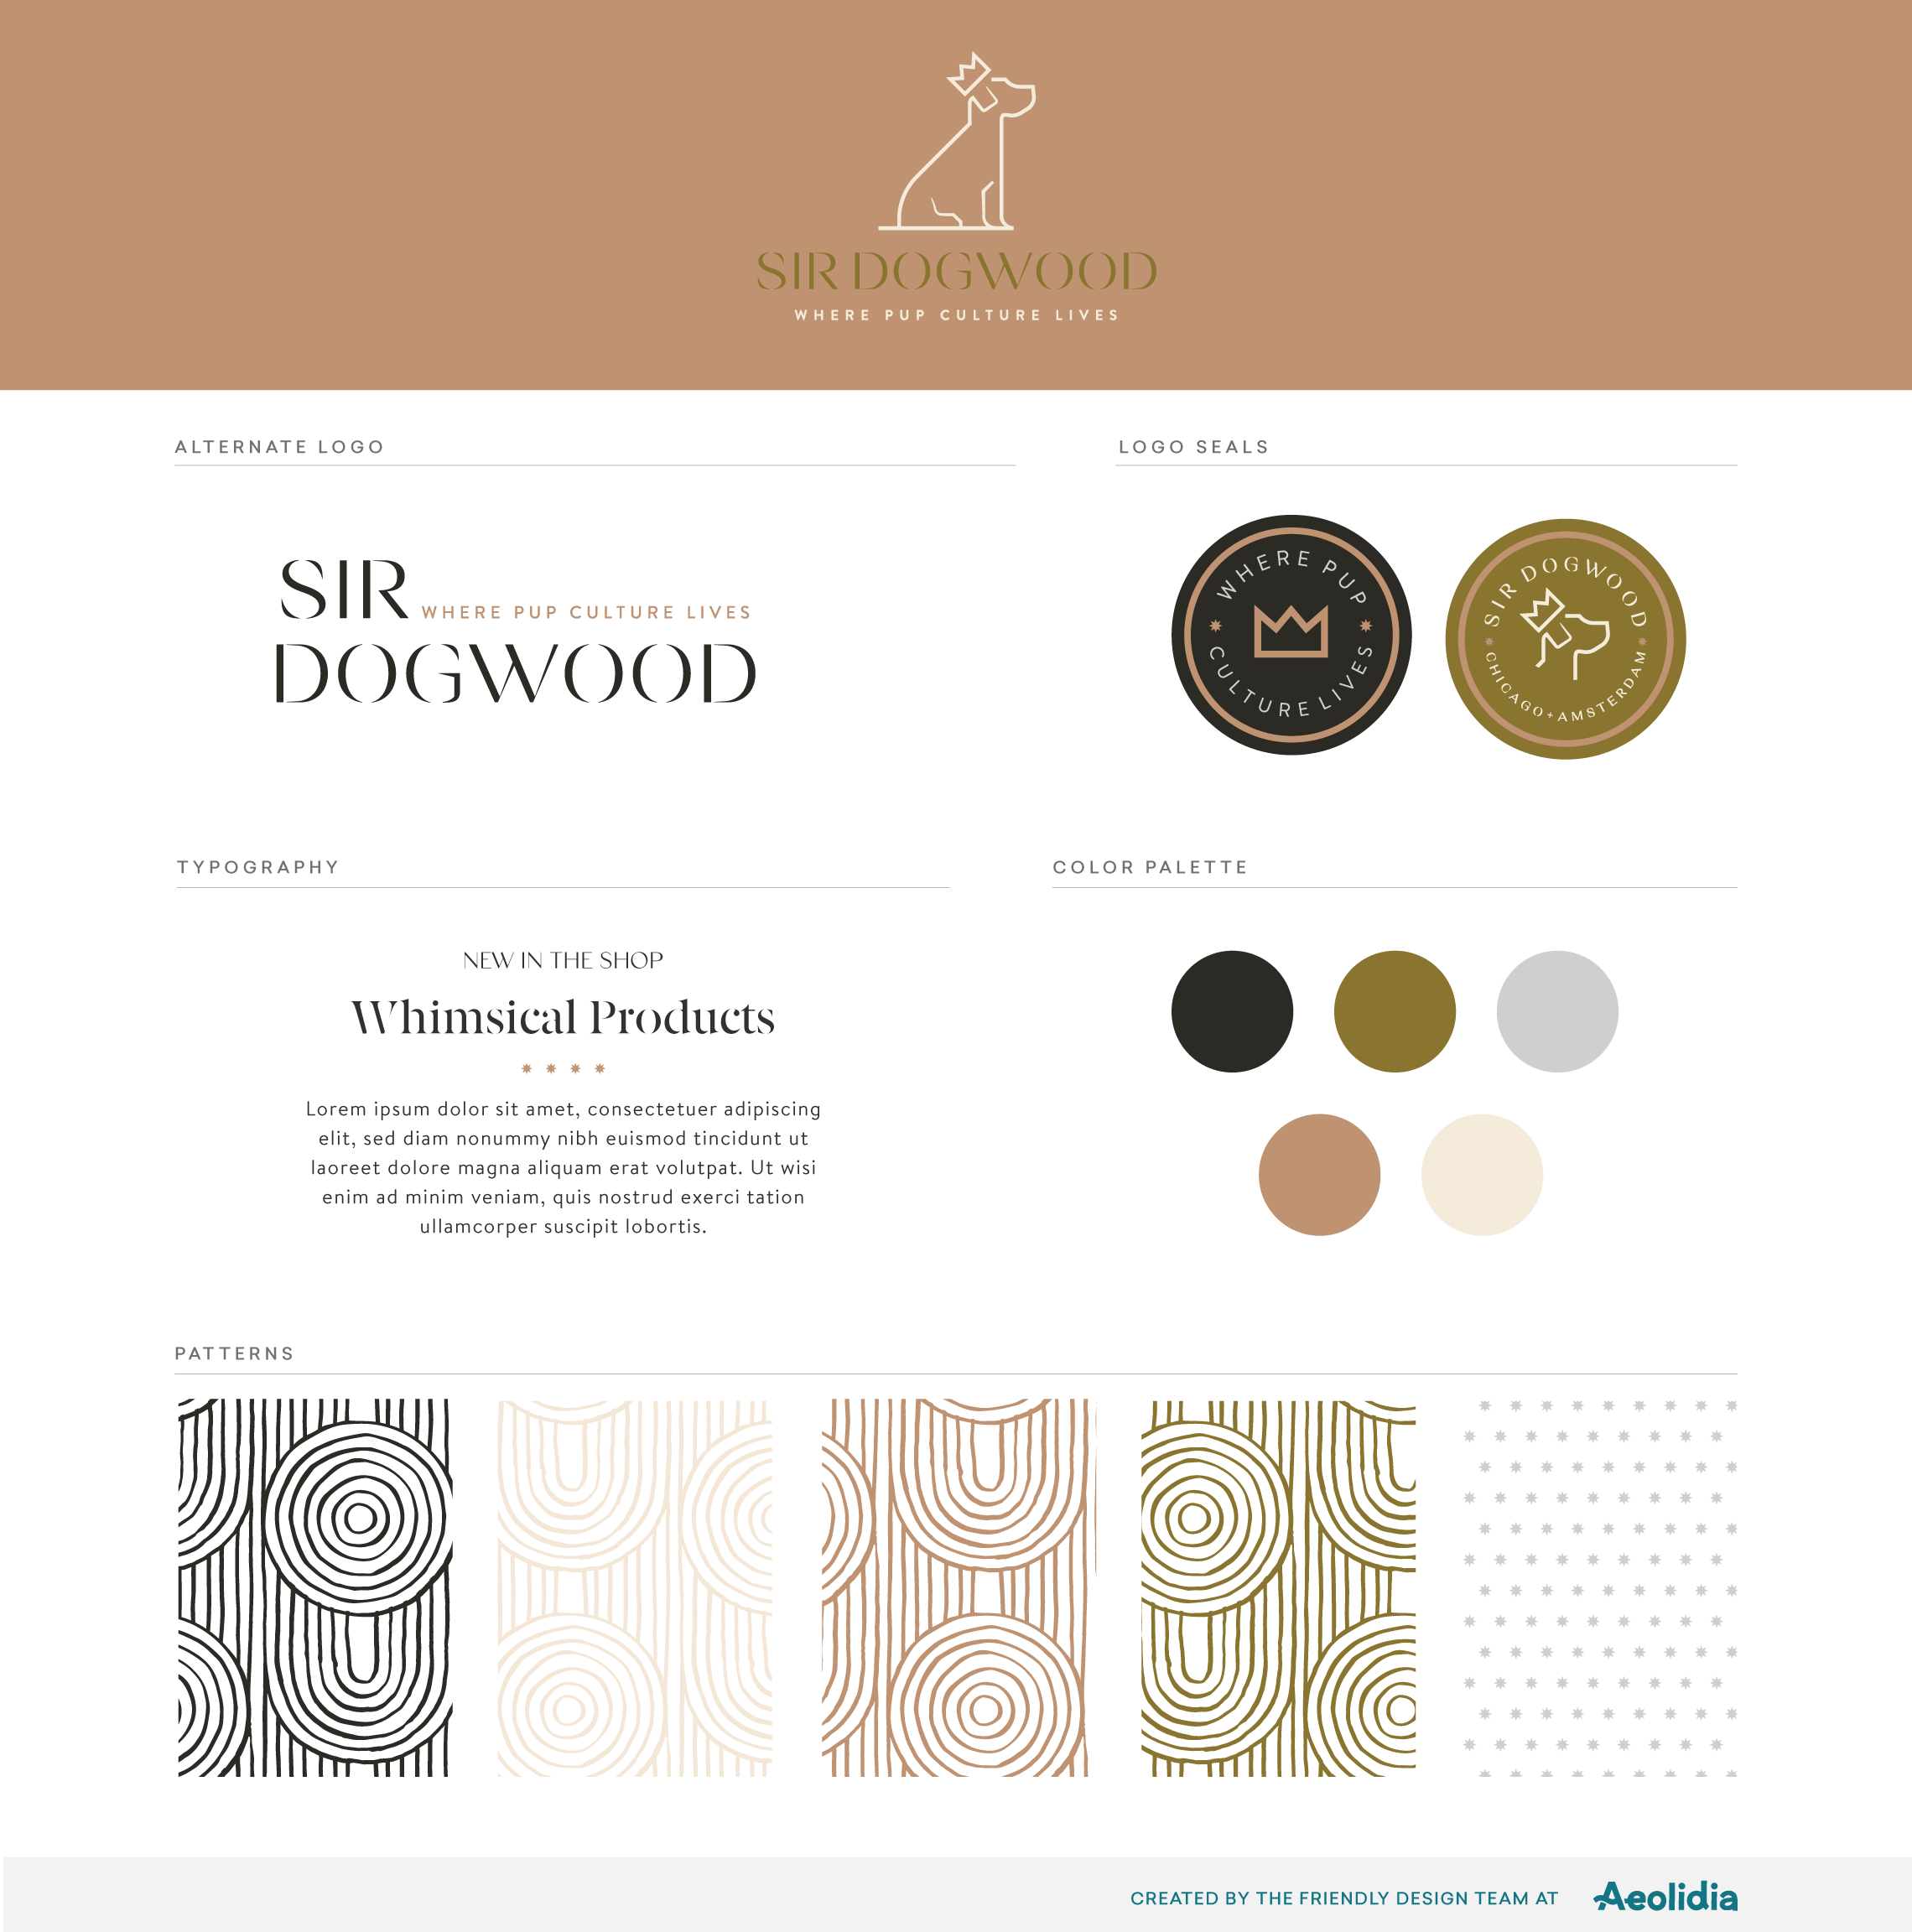 Brand guide for a pet supply store - logos, colors, typography, textures, patterns.